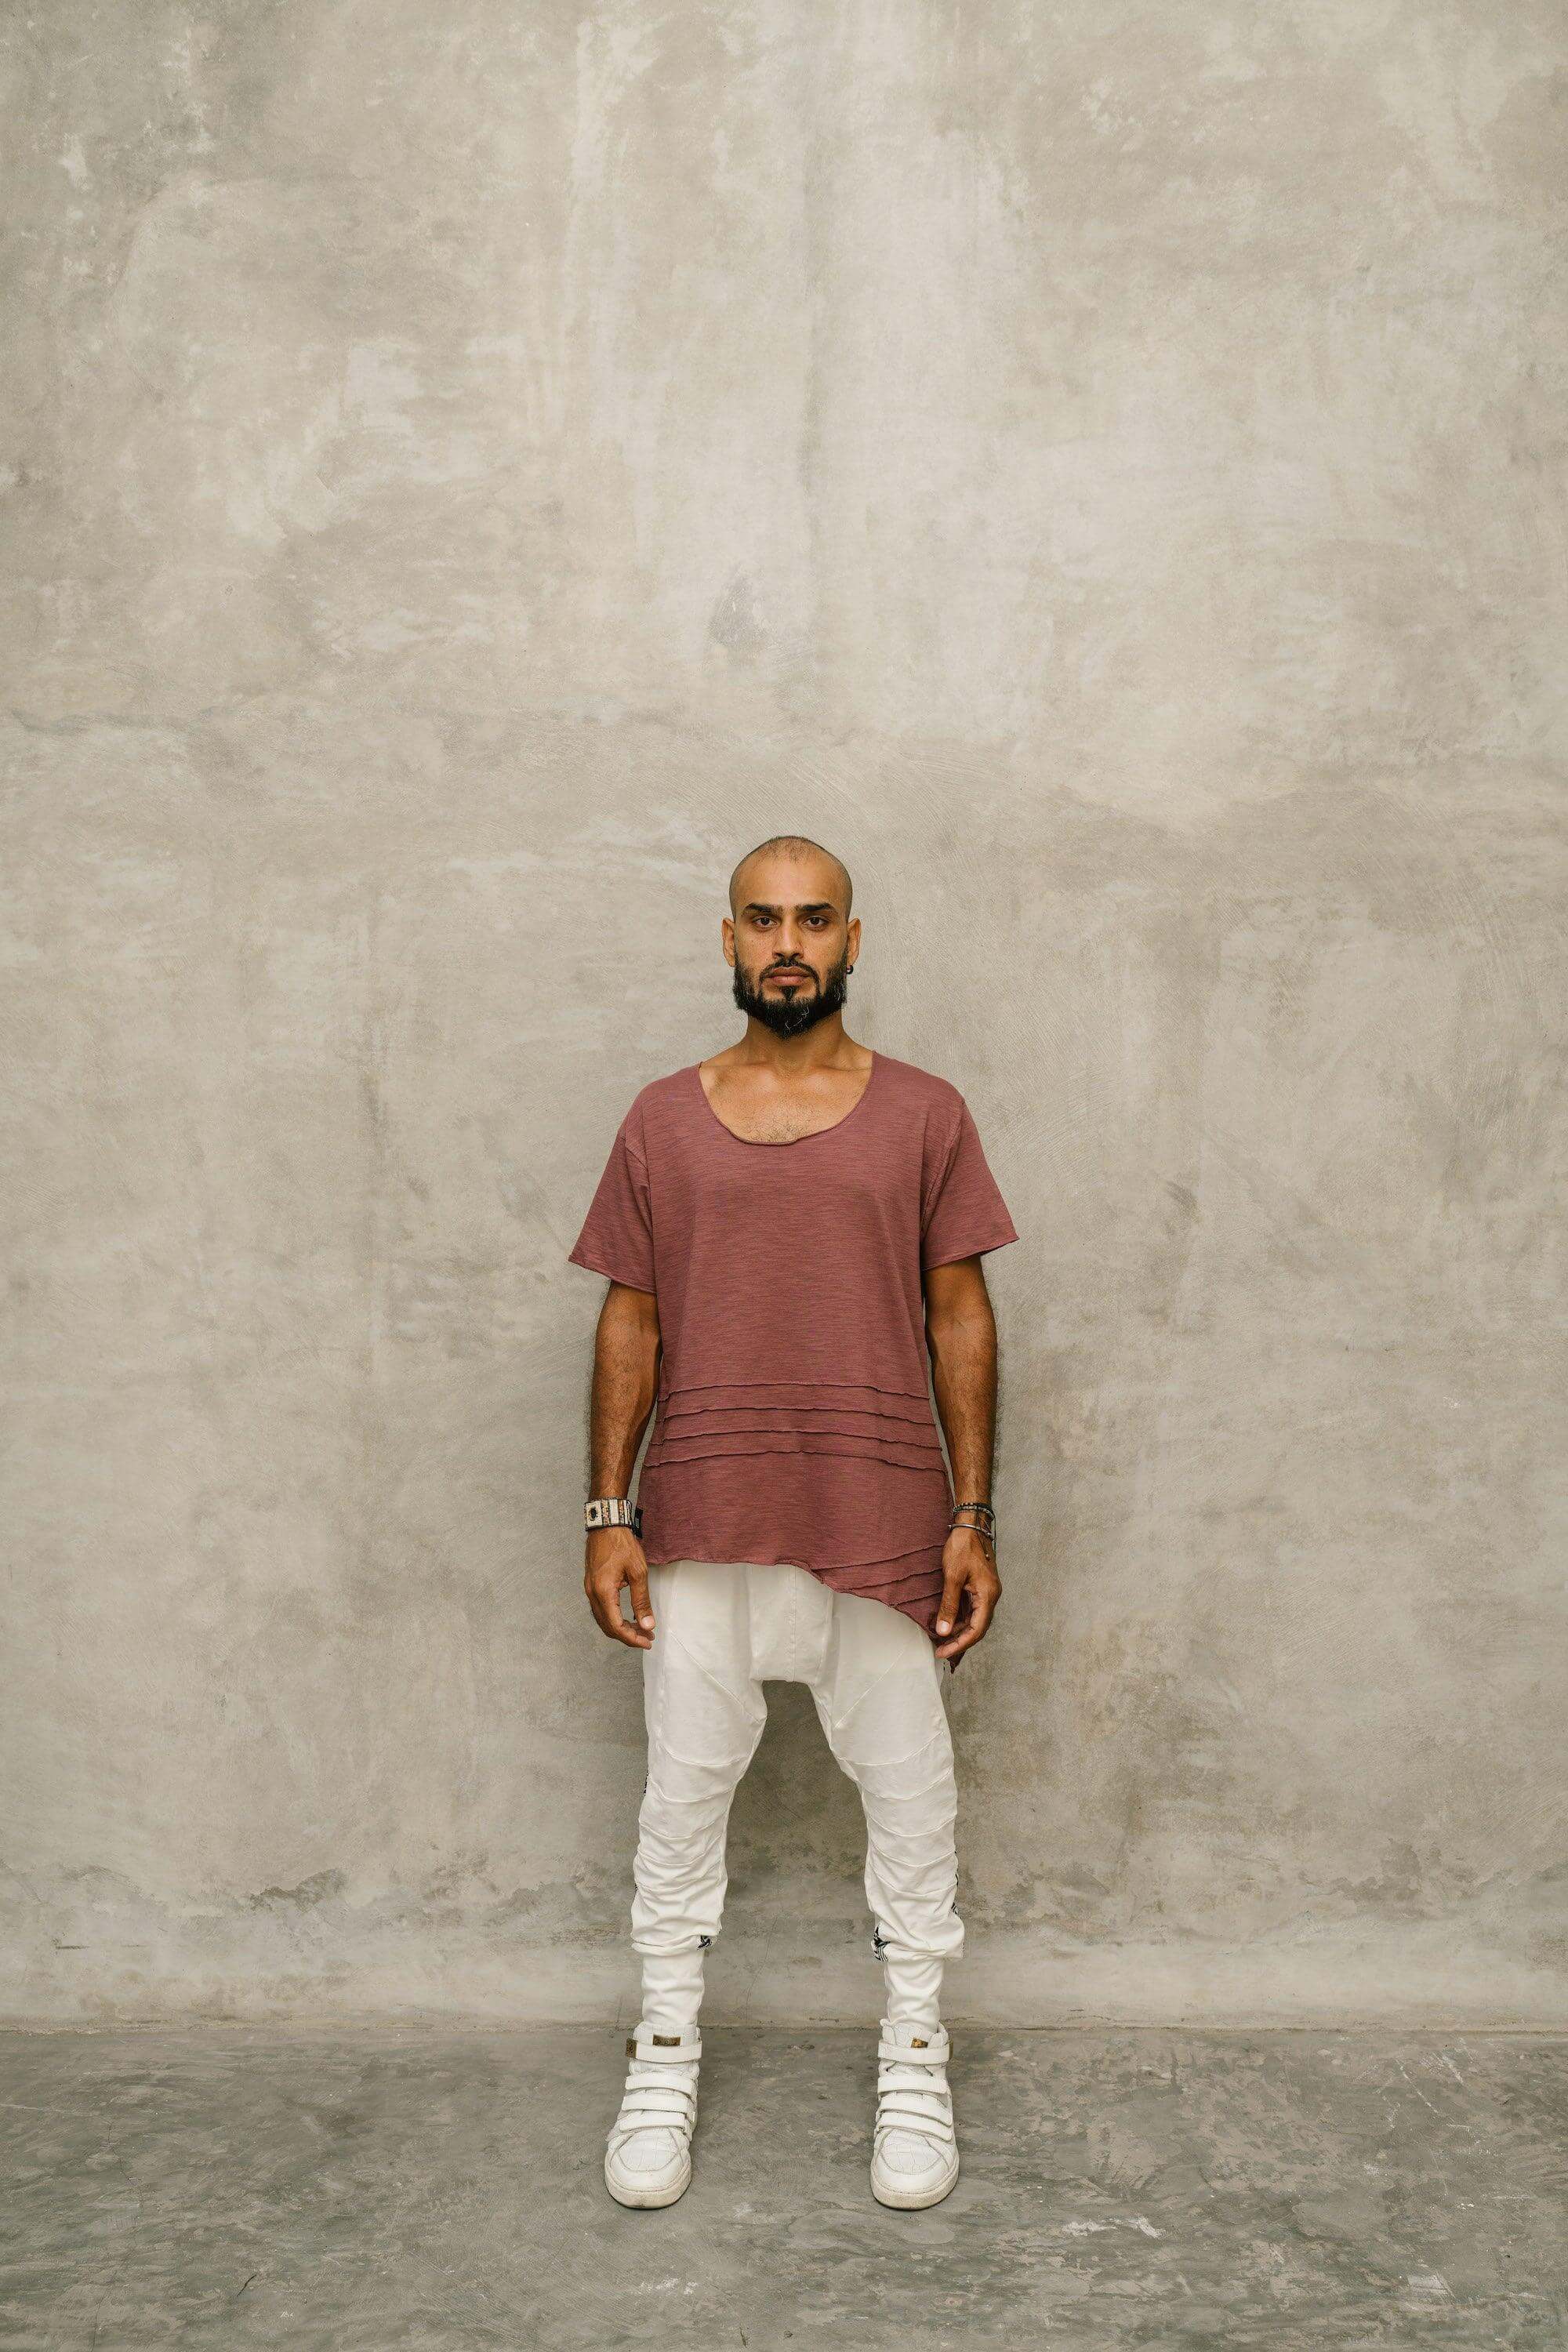 KIVI Tee - a loose fit bamboo t-shirt with asymmetric cuts - VALO Design Clothing 